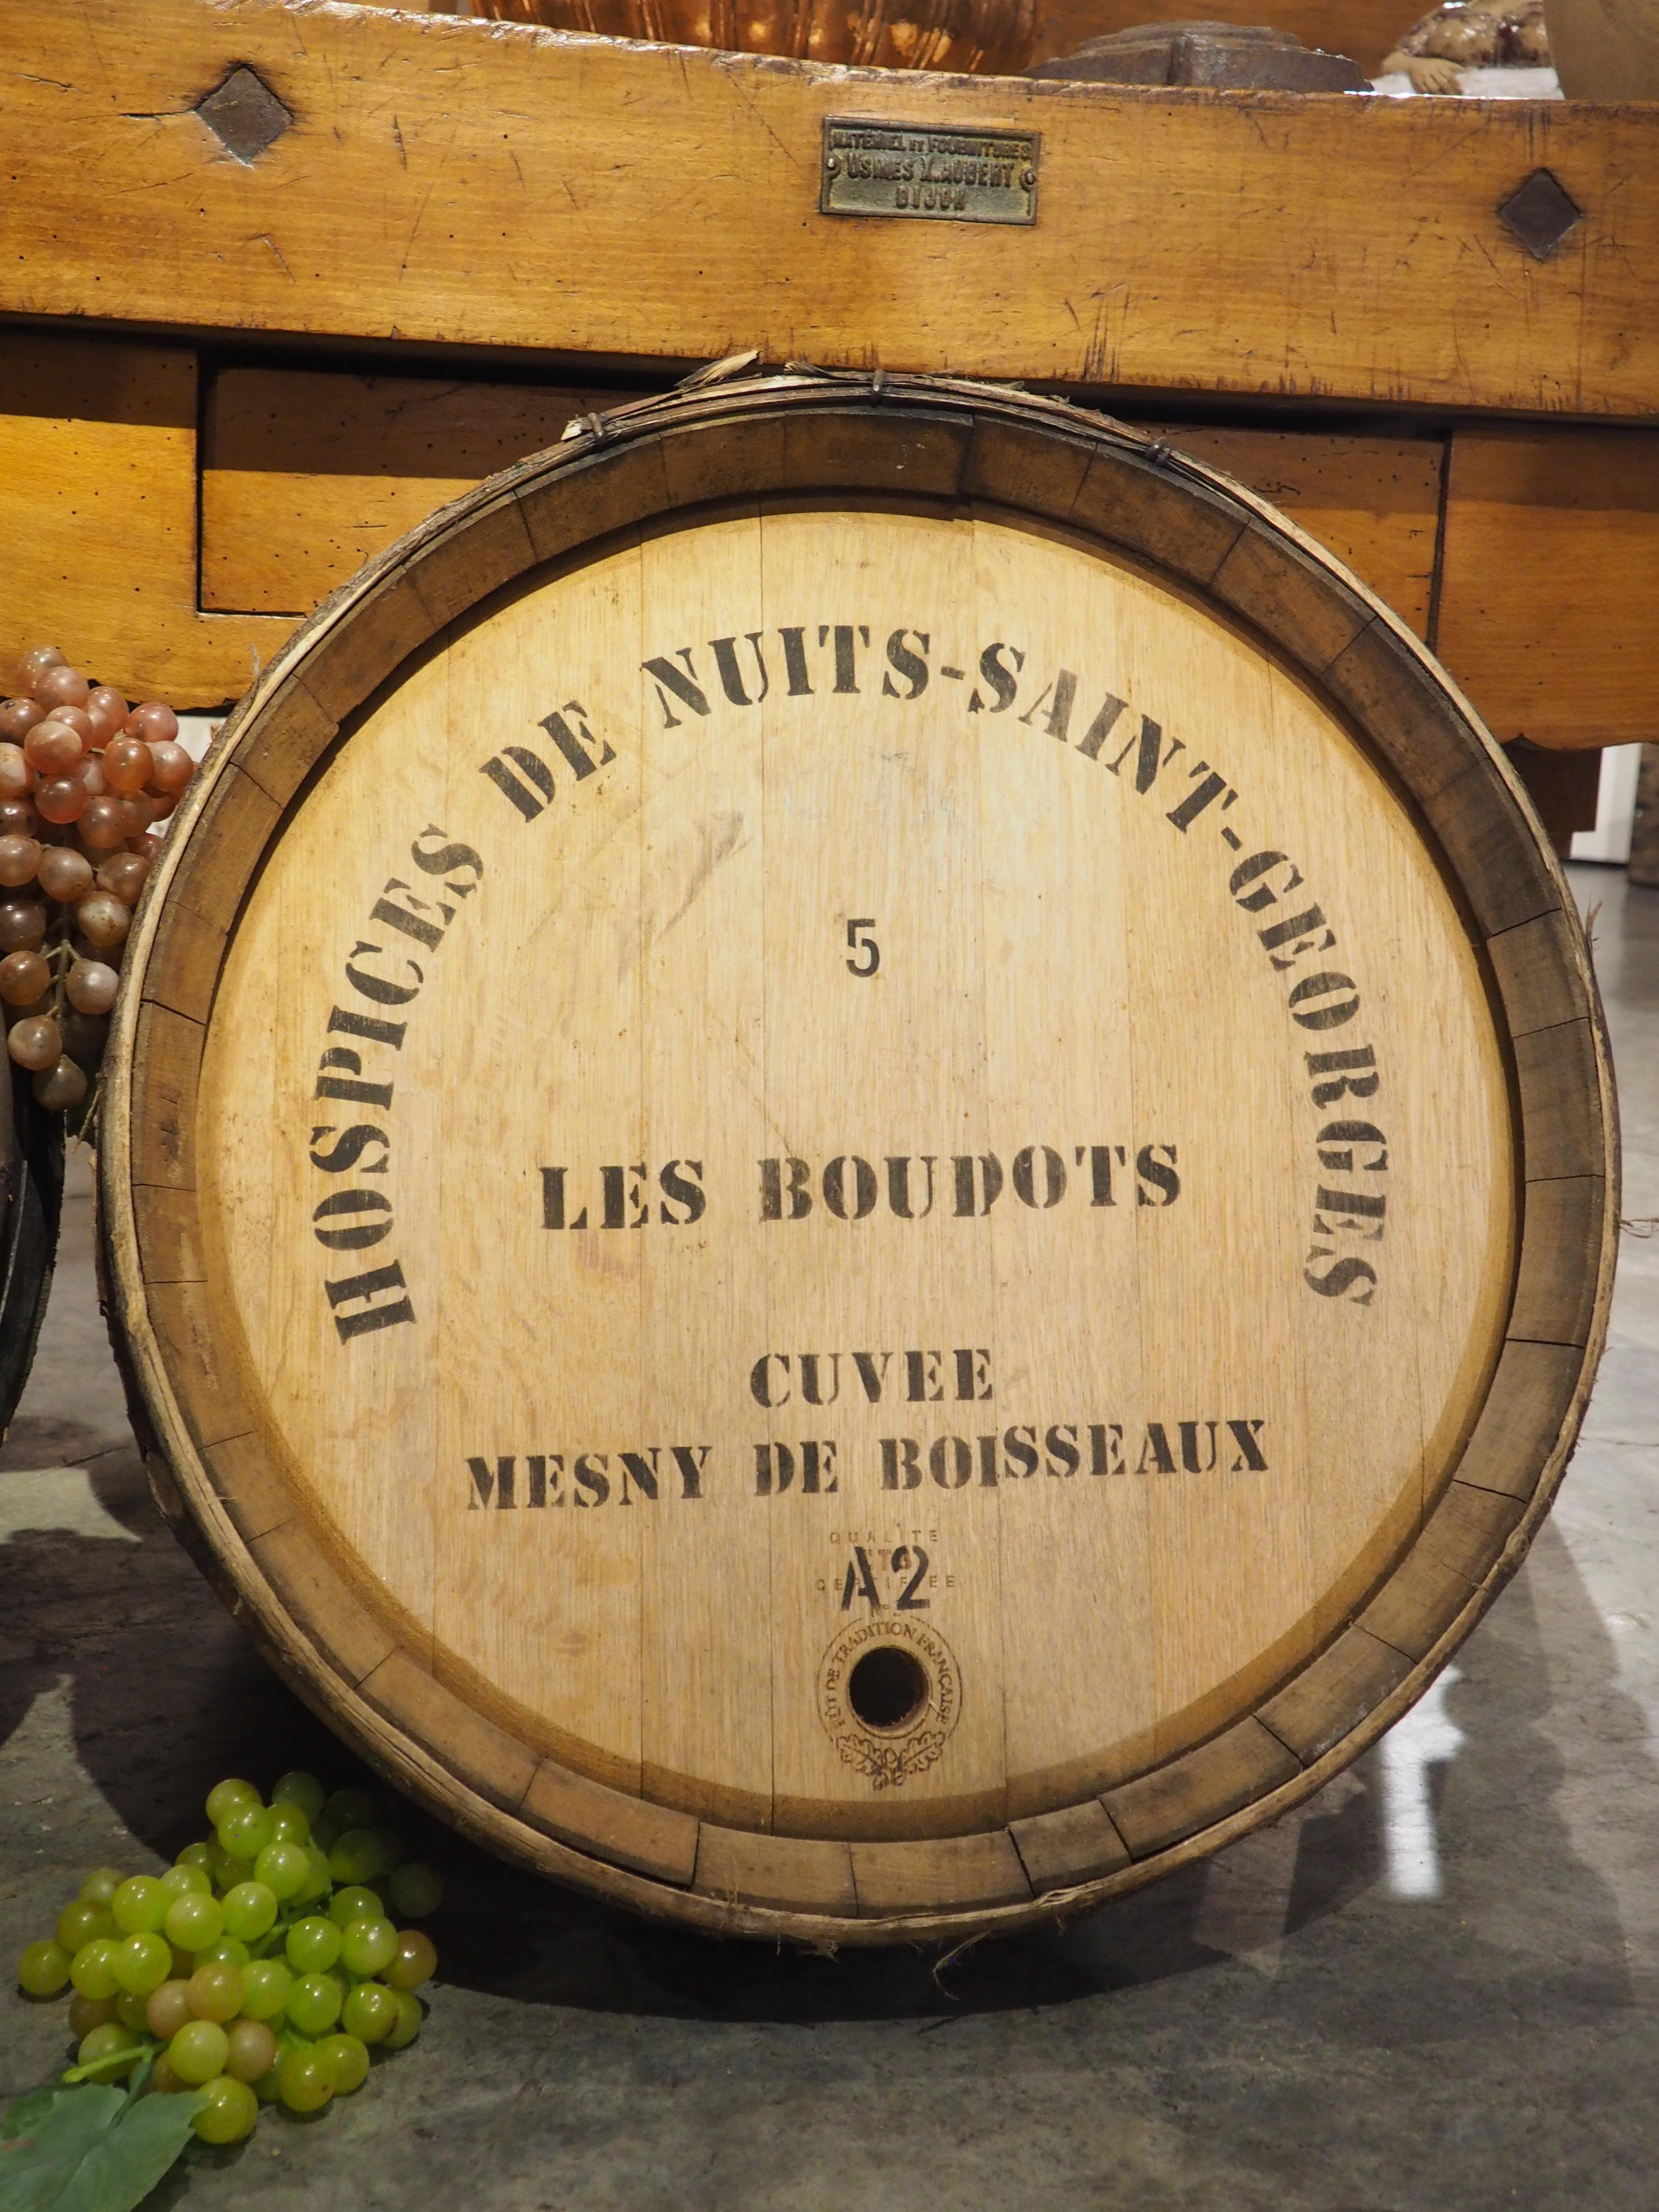 Pair of French Wine Barrel Facades, “Hospices de Nuits-Saint-Georges”, 1900s For Sale 8